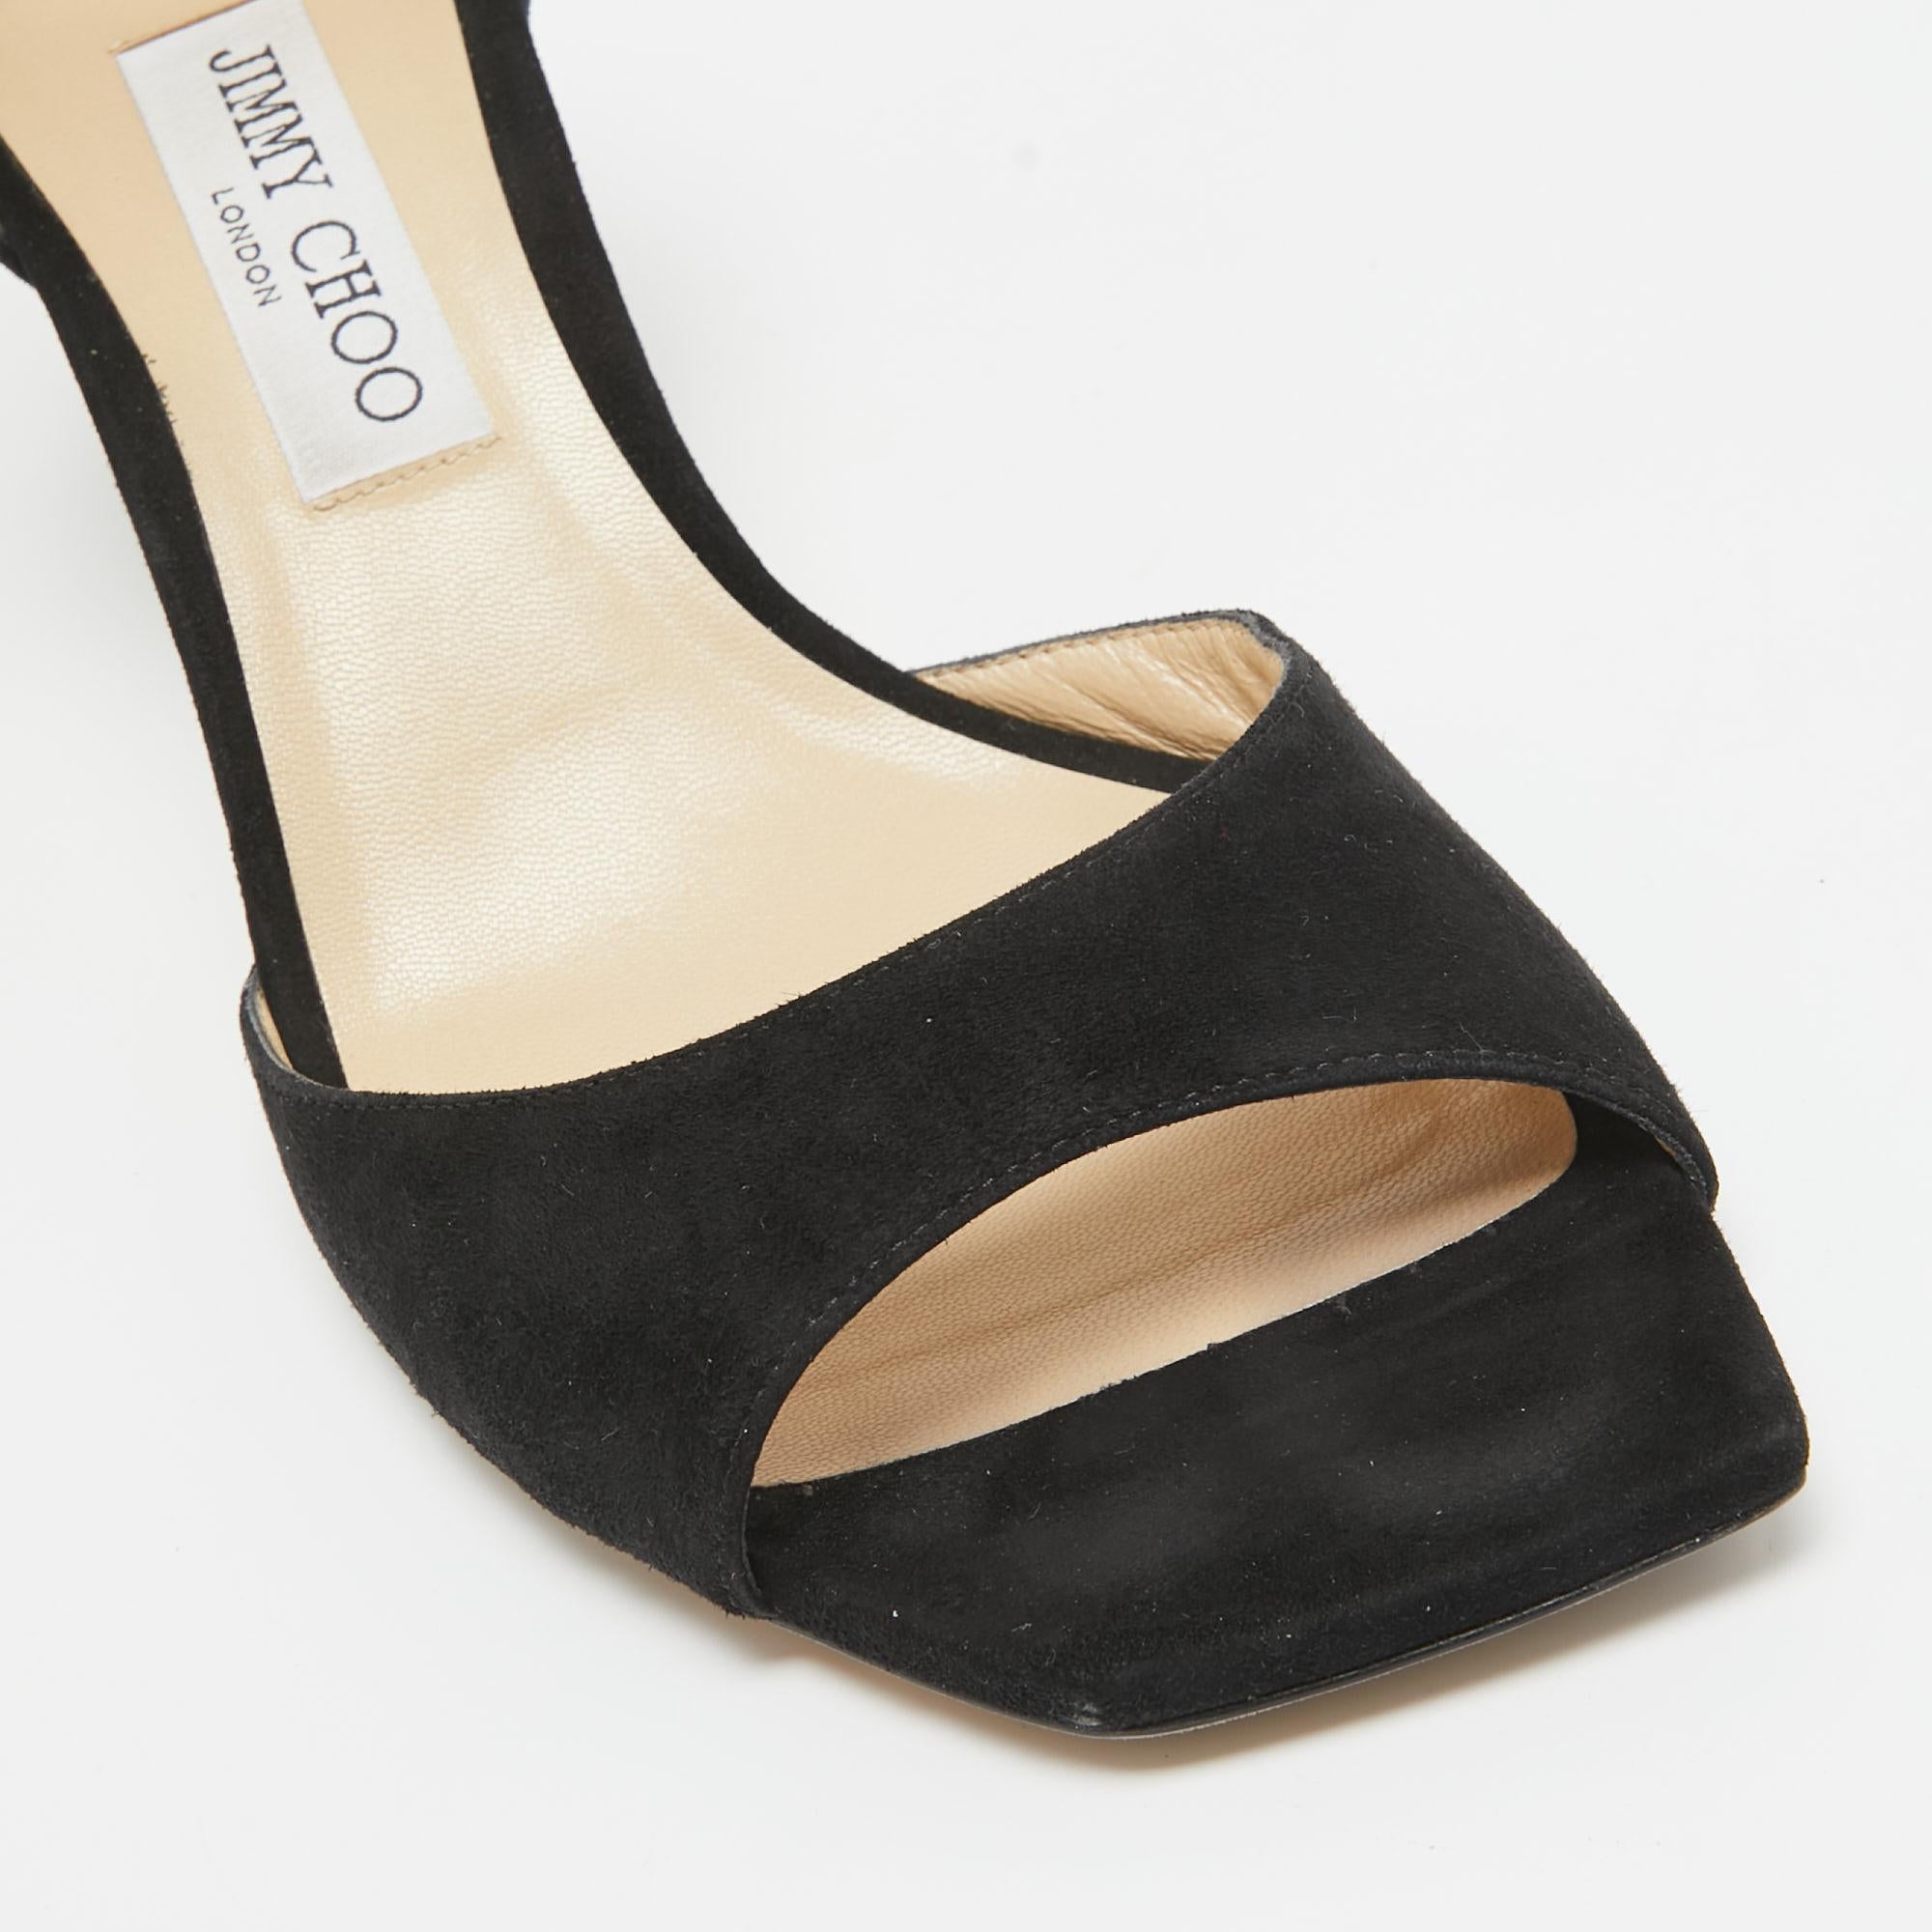 Jimmy Choo Black Suede Reon Sandals Size 41 2